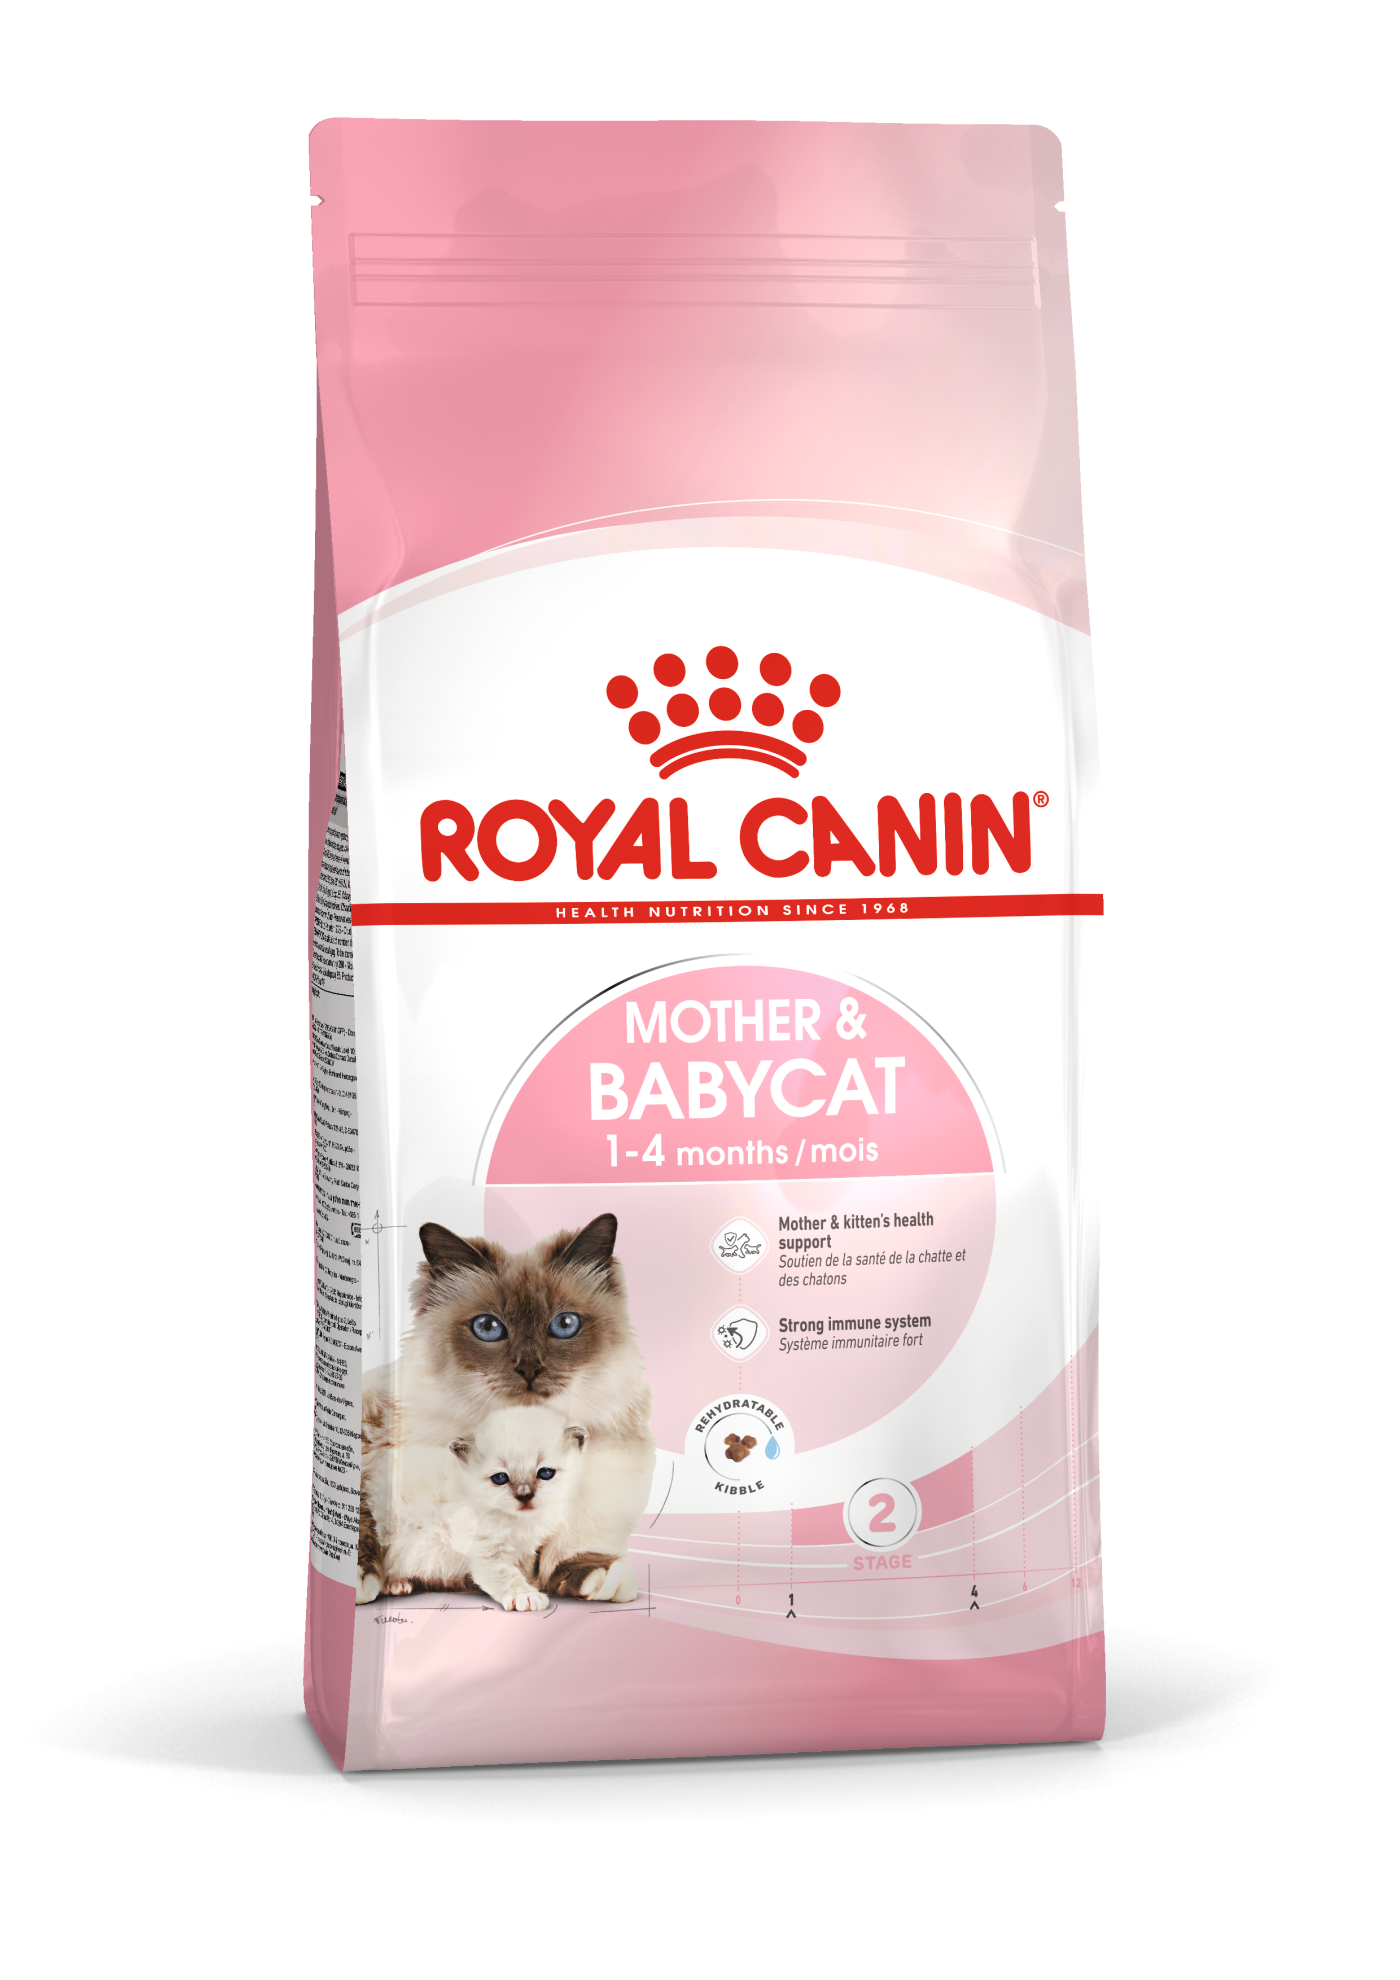 Royal Canin Mother and Babycat Kitten Kibble